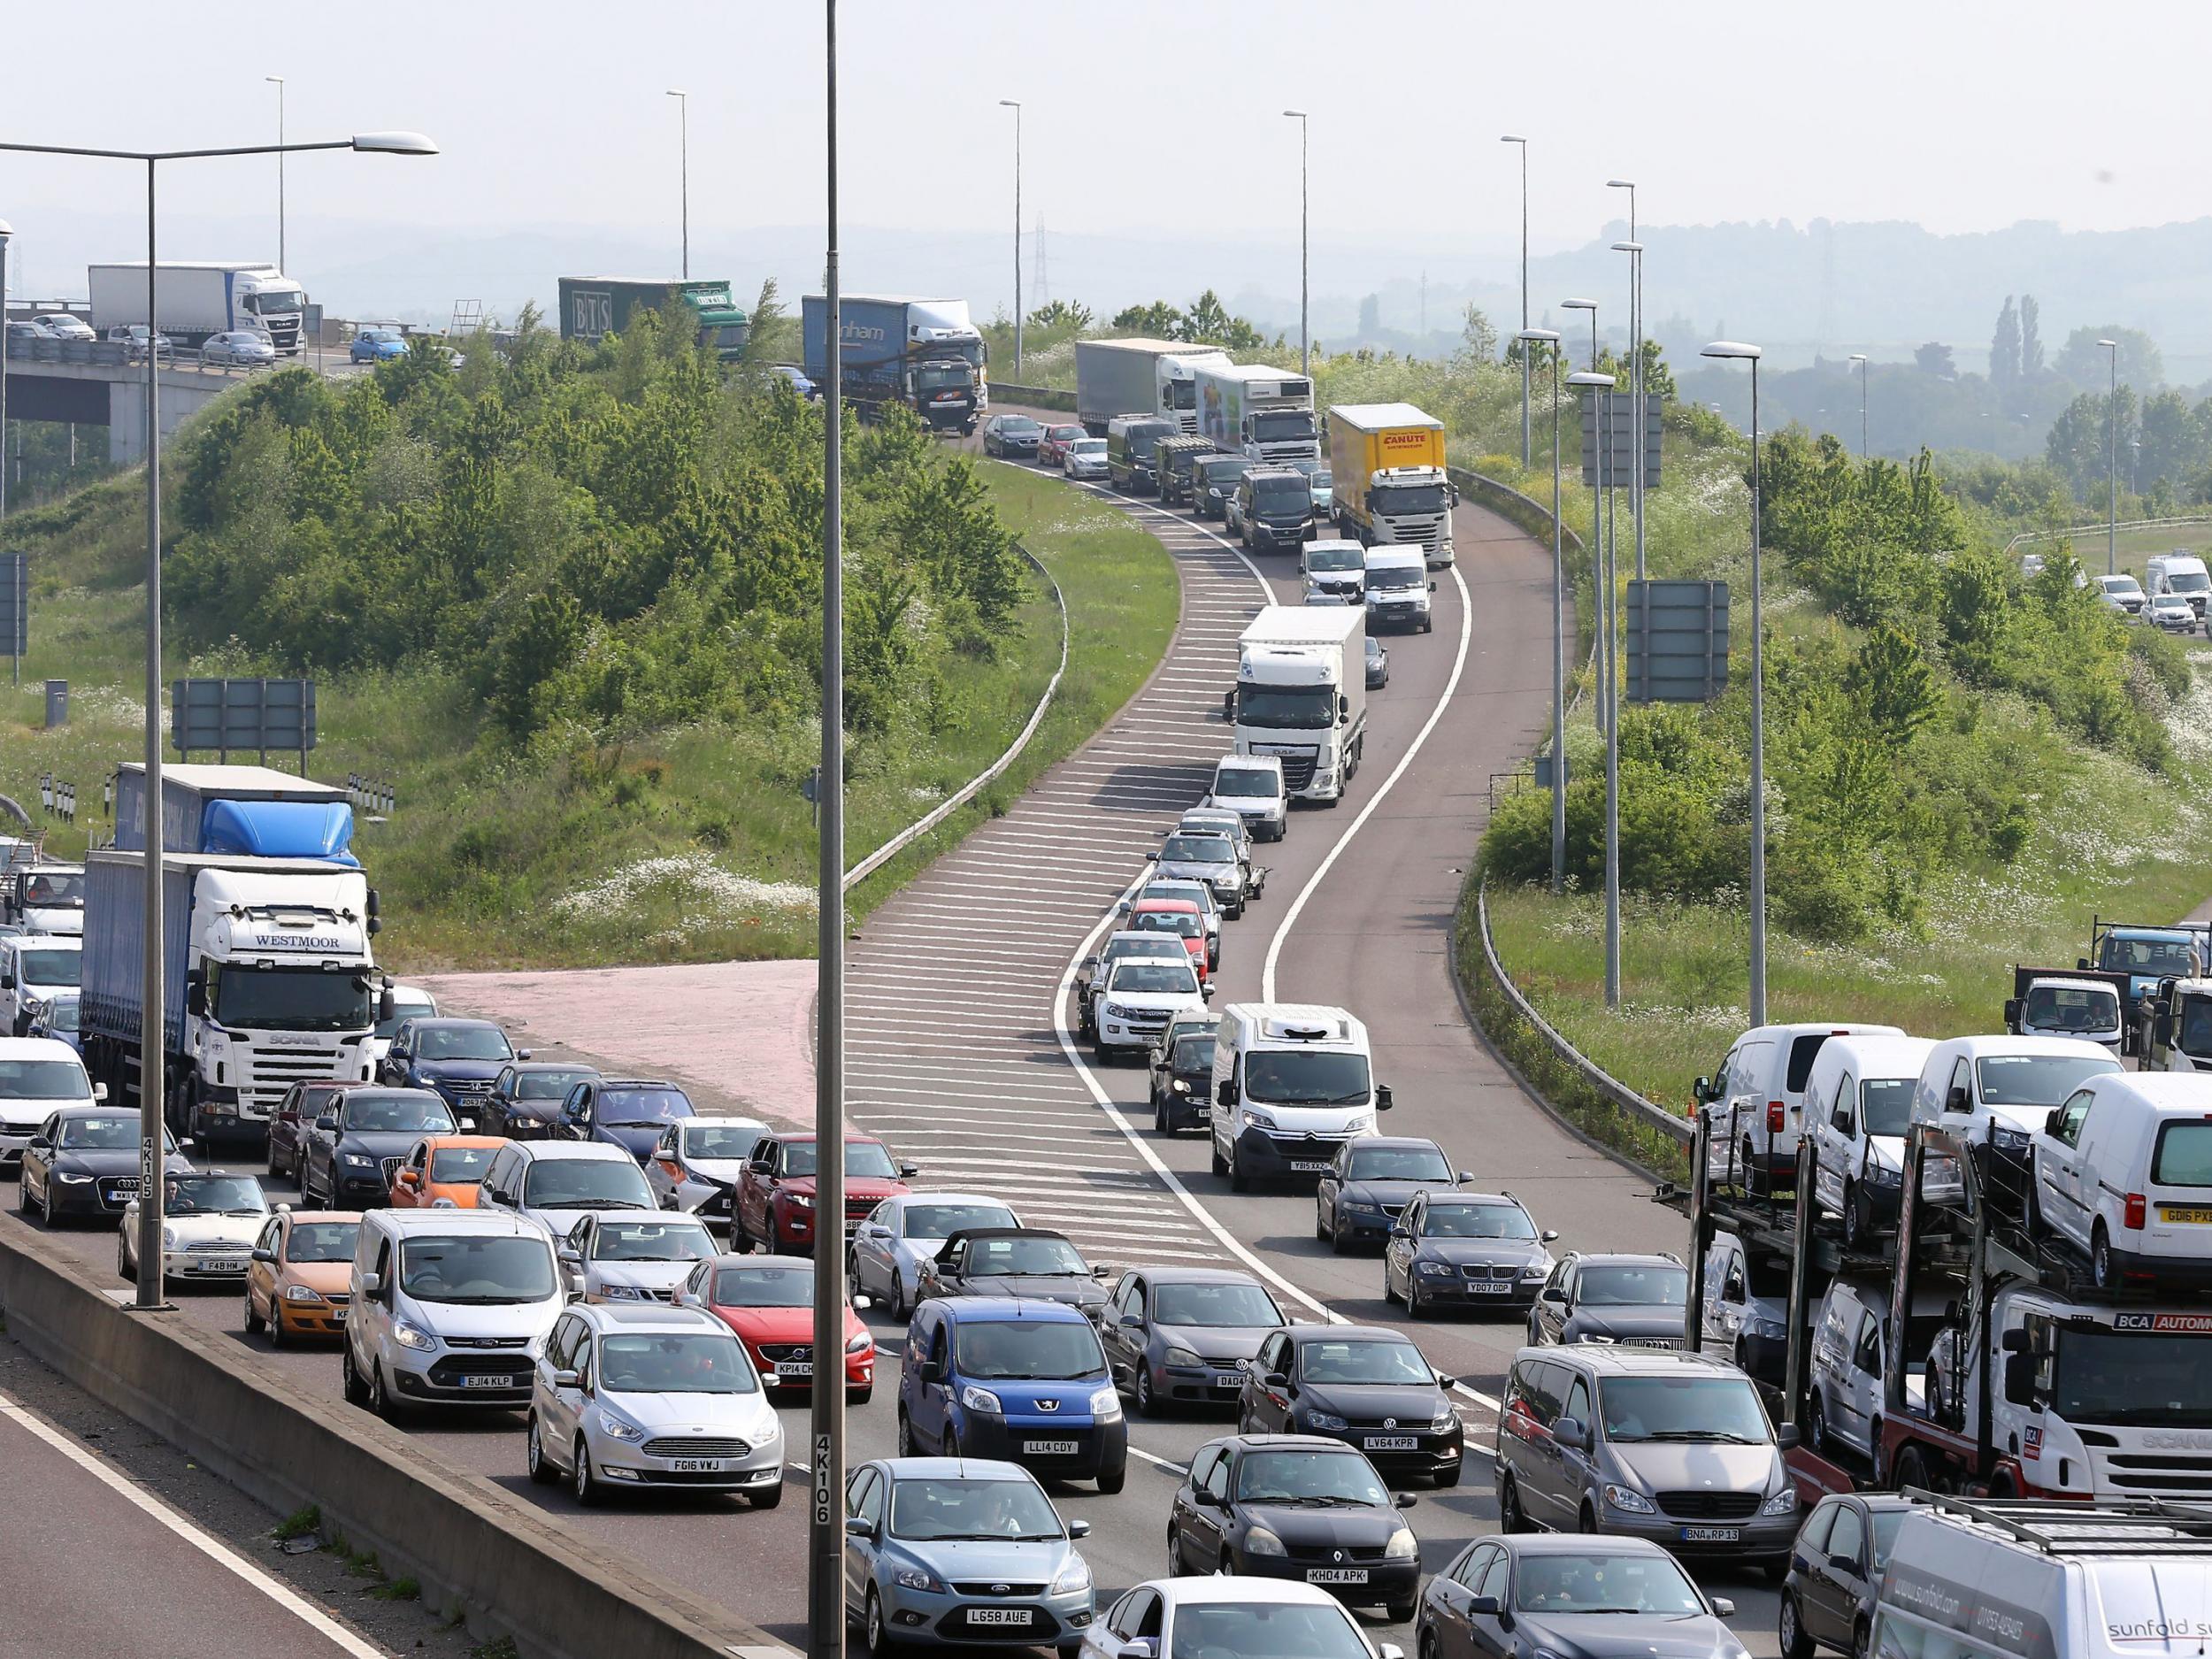 Long traffic jams expected as millions of drivers hit road on busiest